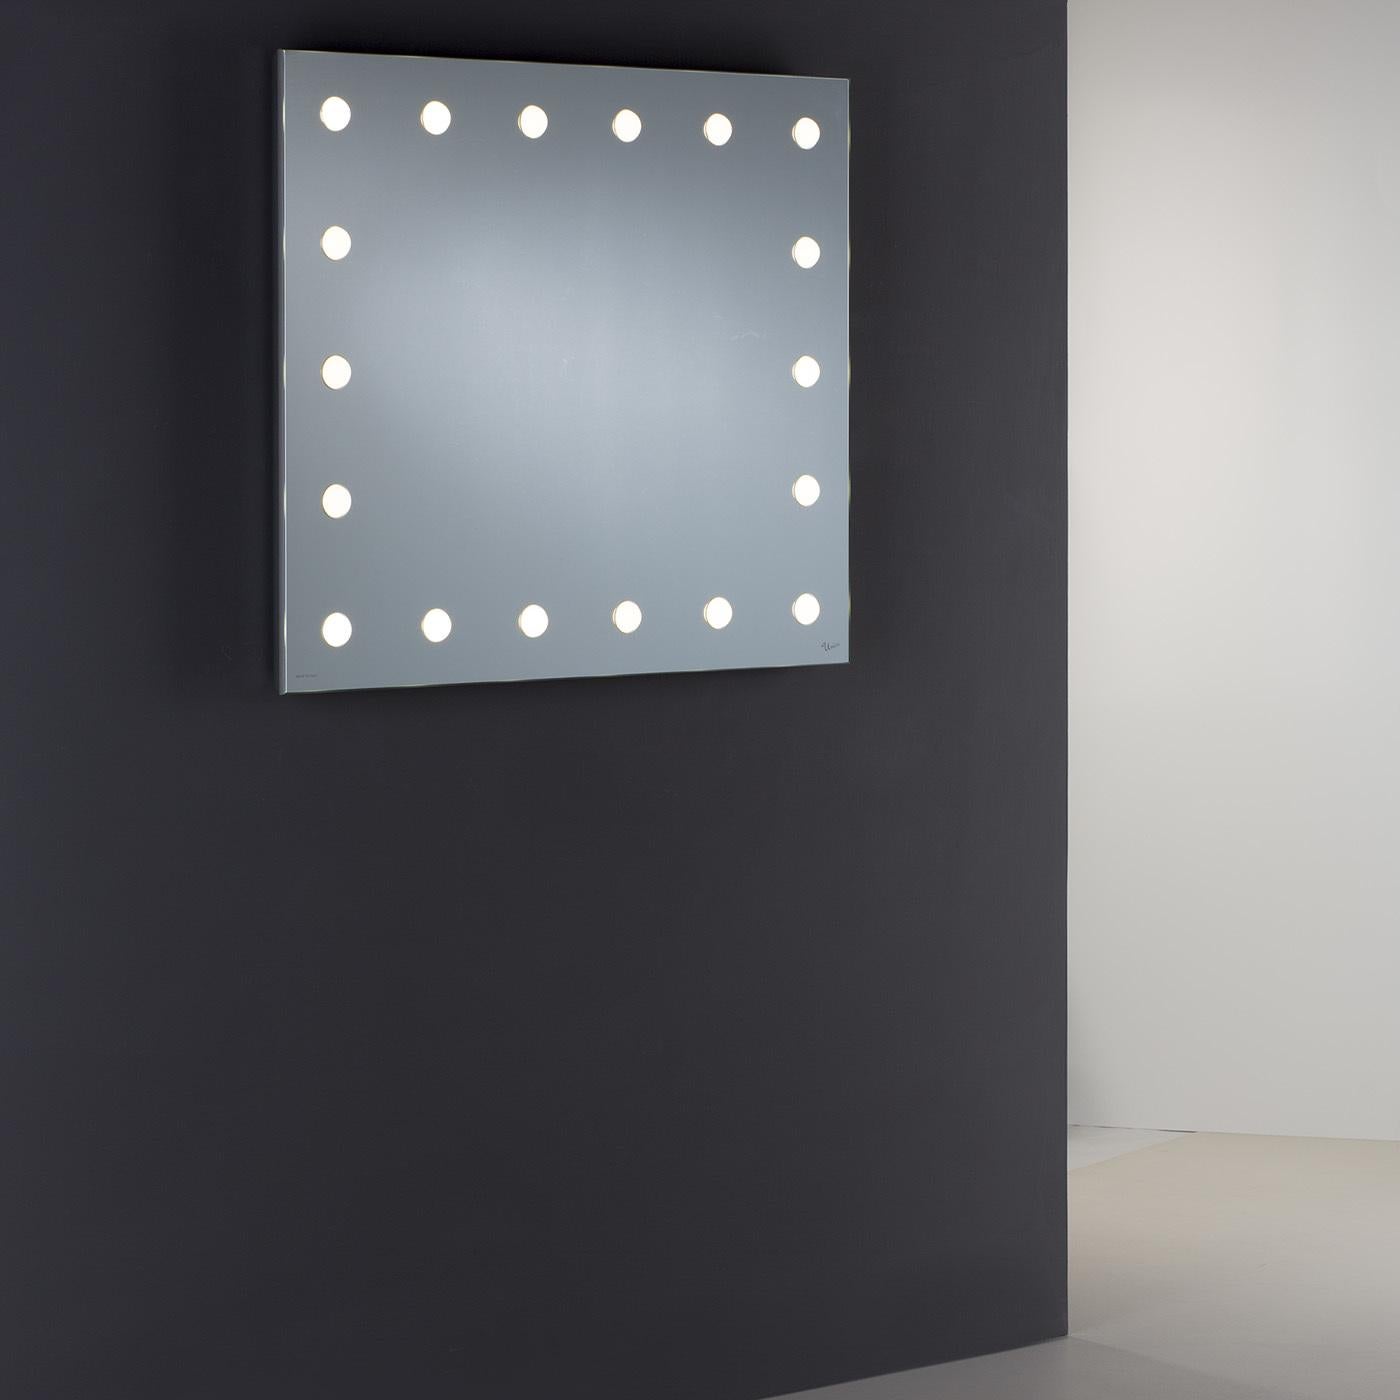 Iconic in its design reminiscent of Hollywood glamour, this backstage-style mirror is the ultimate statement-making piece for every fashionista. Combining brightness and simple elegance, the silver anodized aluminum frame features 18 opaline lenses